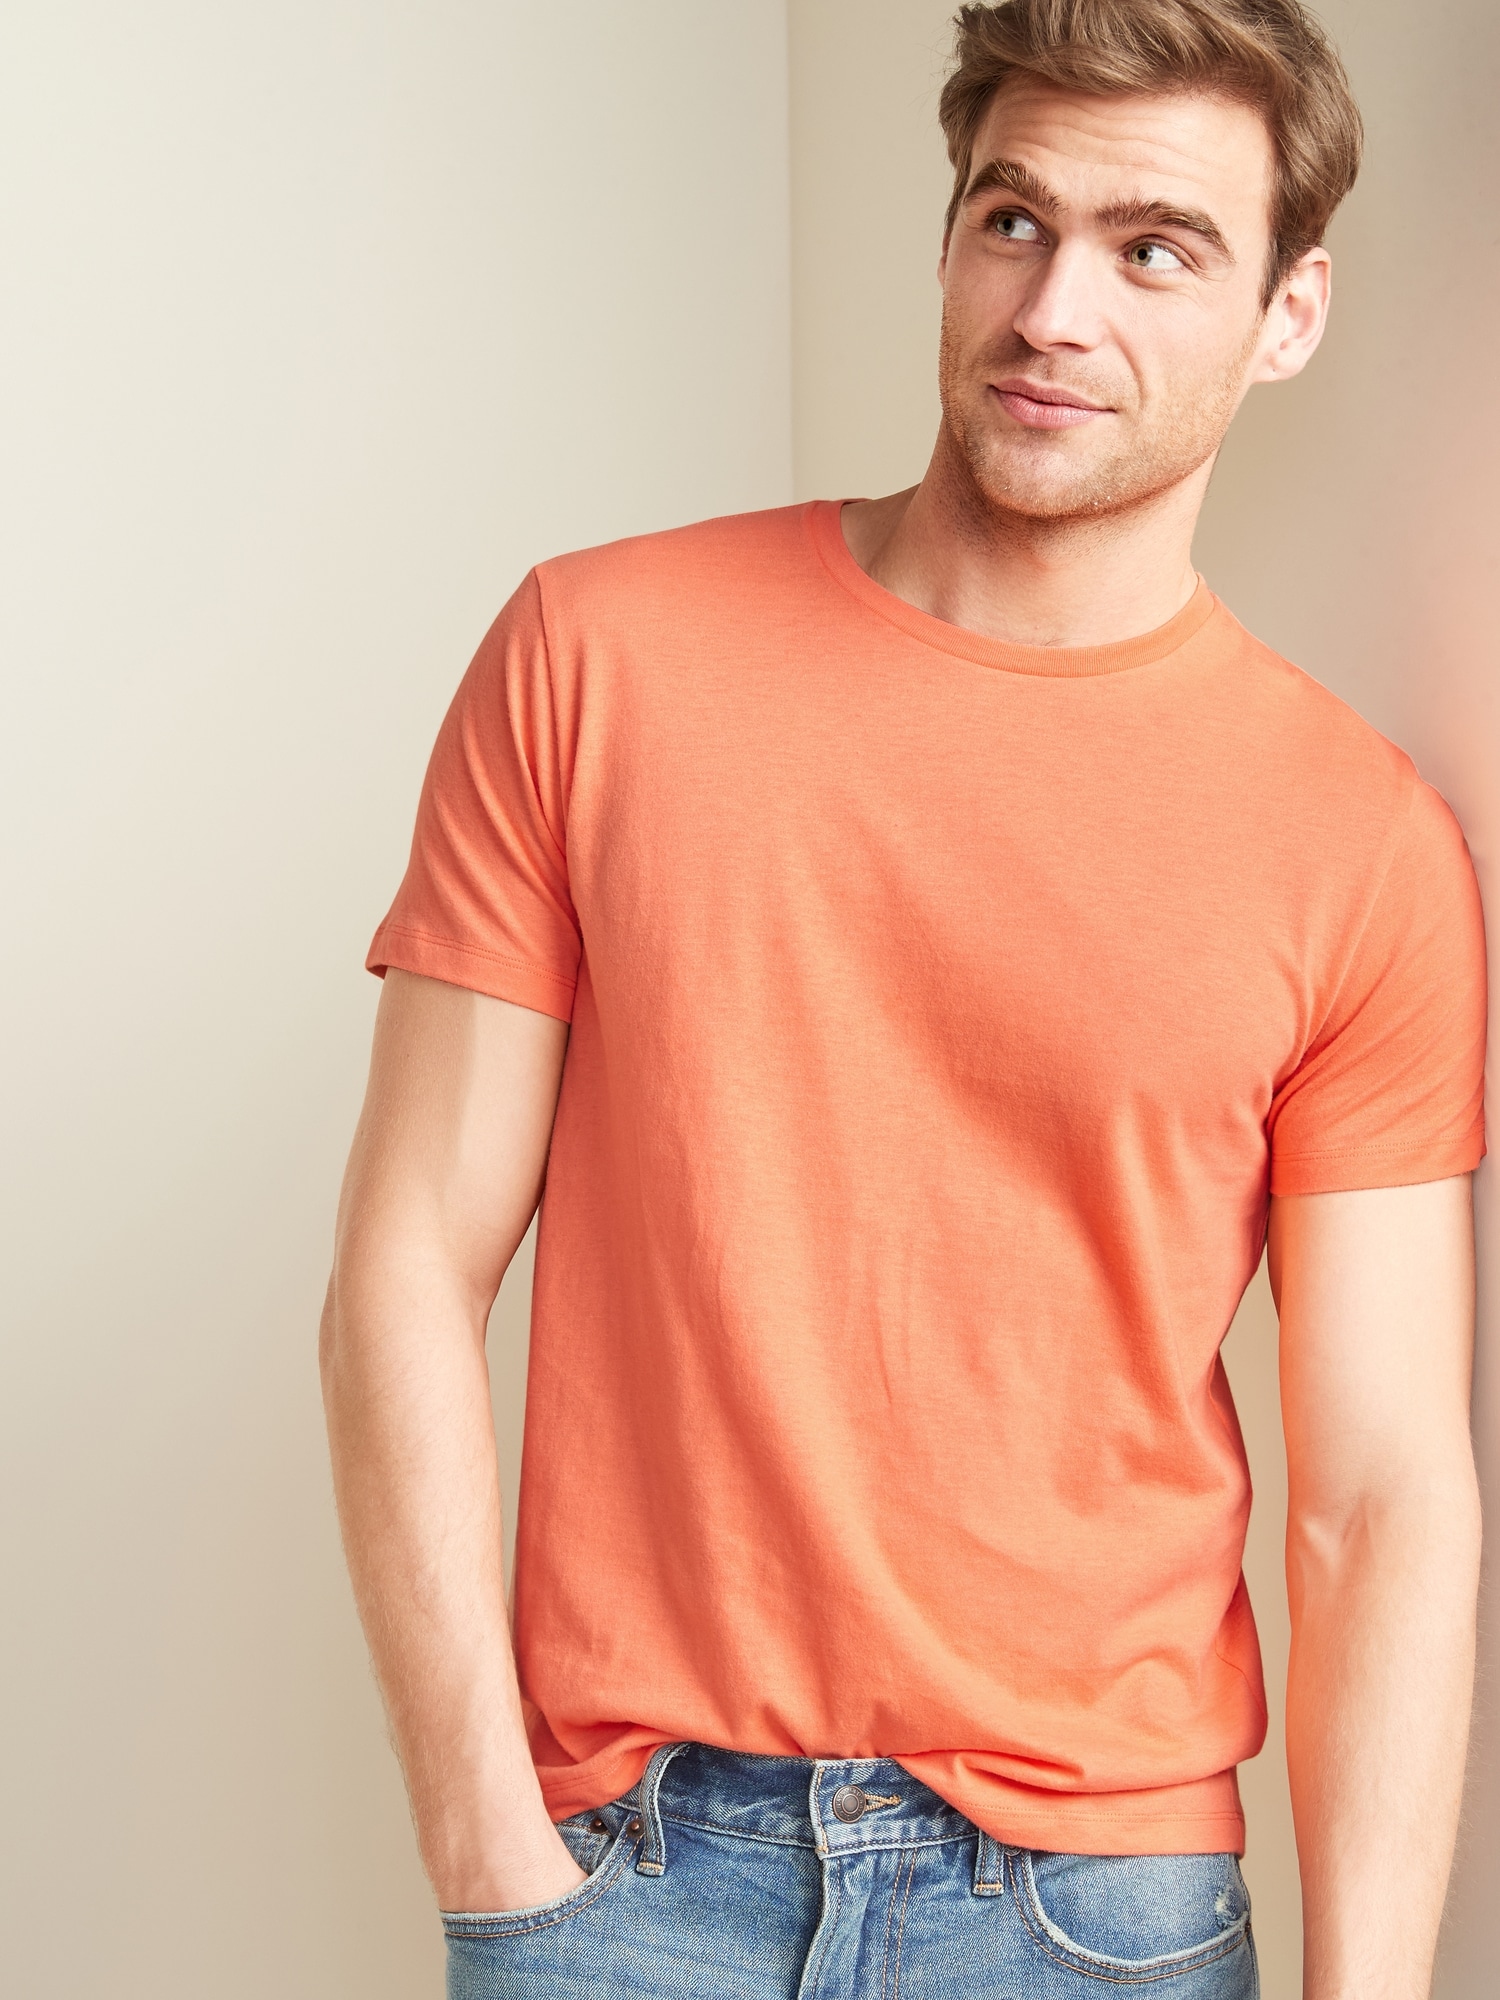 Soft-Washed Crew-Neck Tee for Men